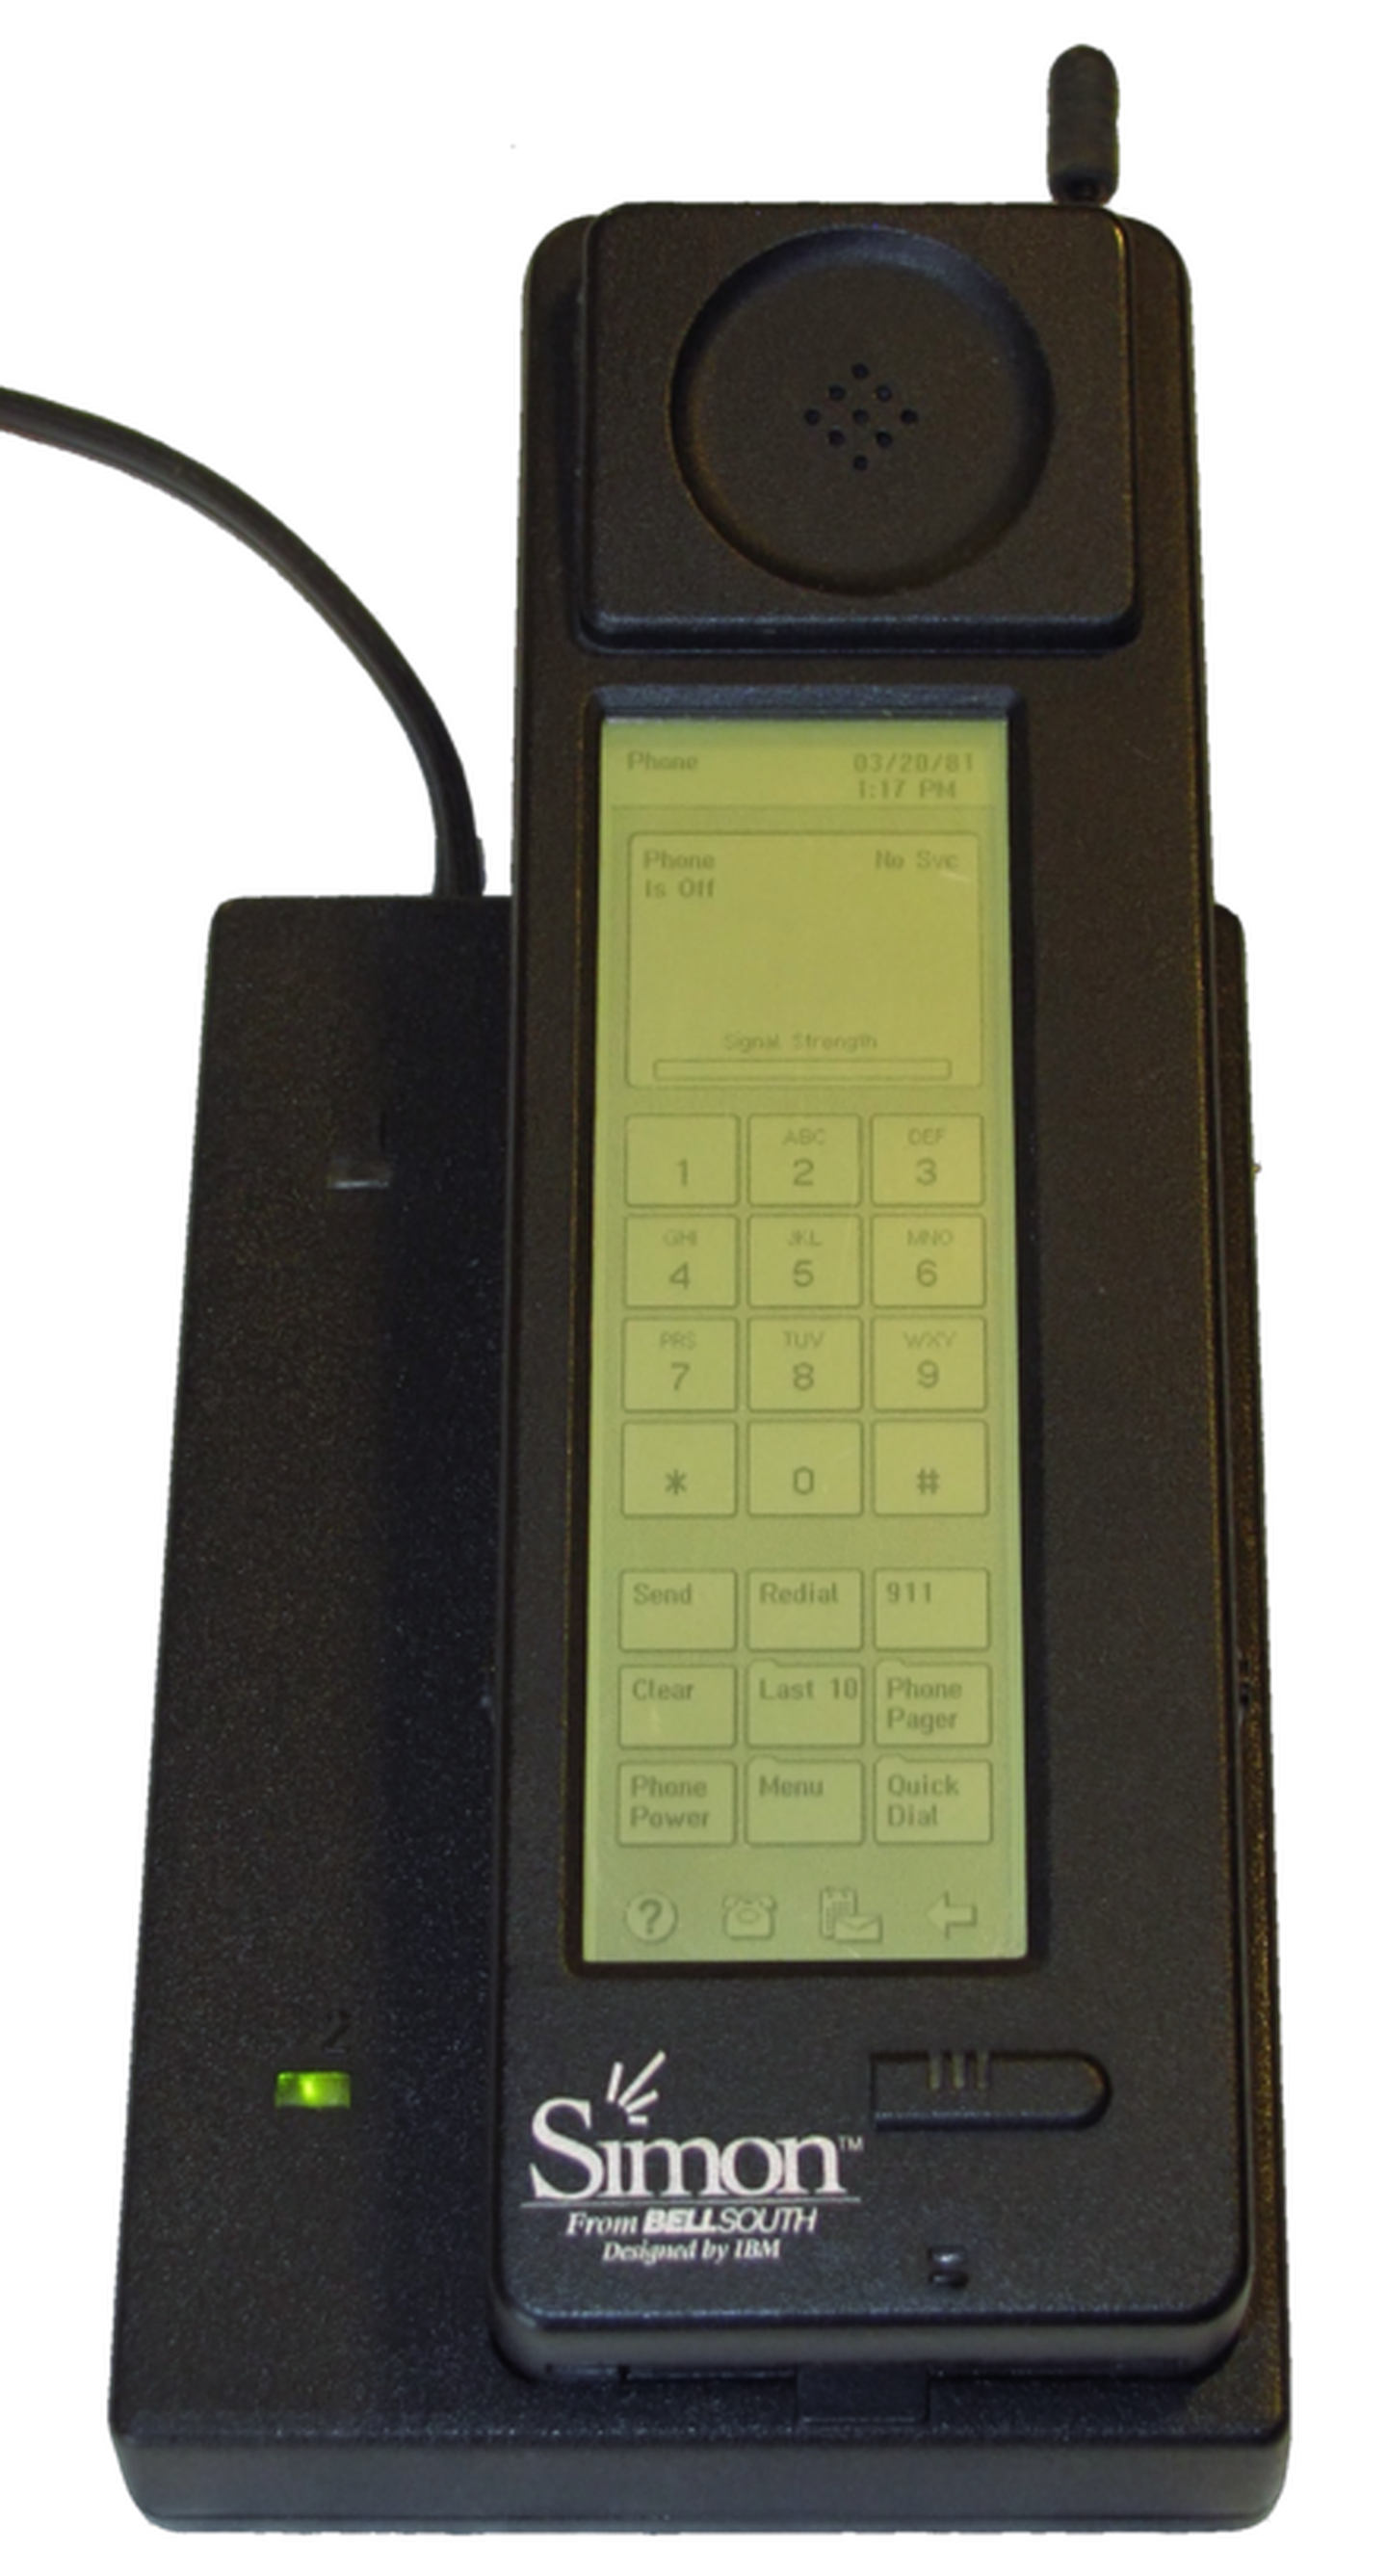 The IBM Simon had a touchscreen and the earliest form of apps. Photo: Wikipedia